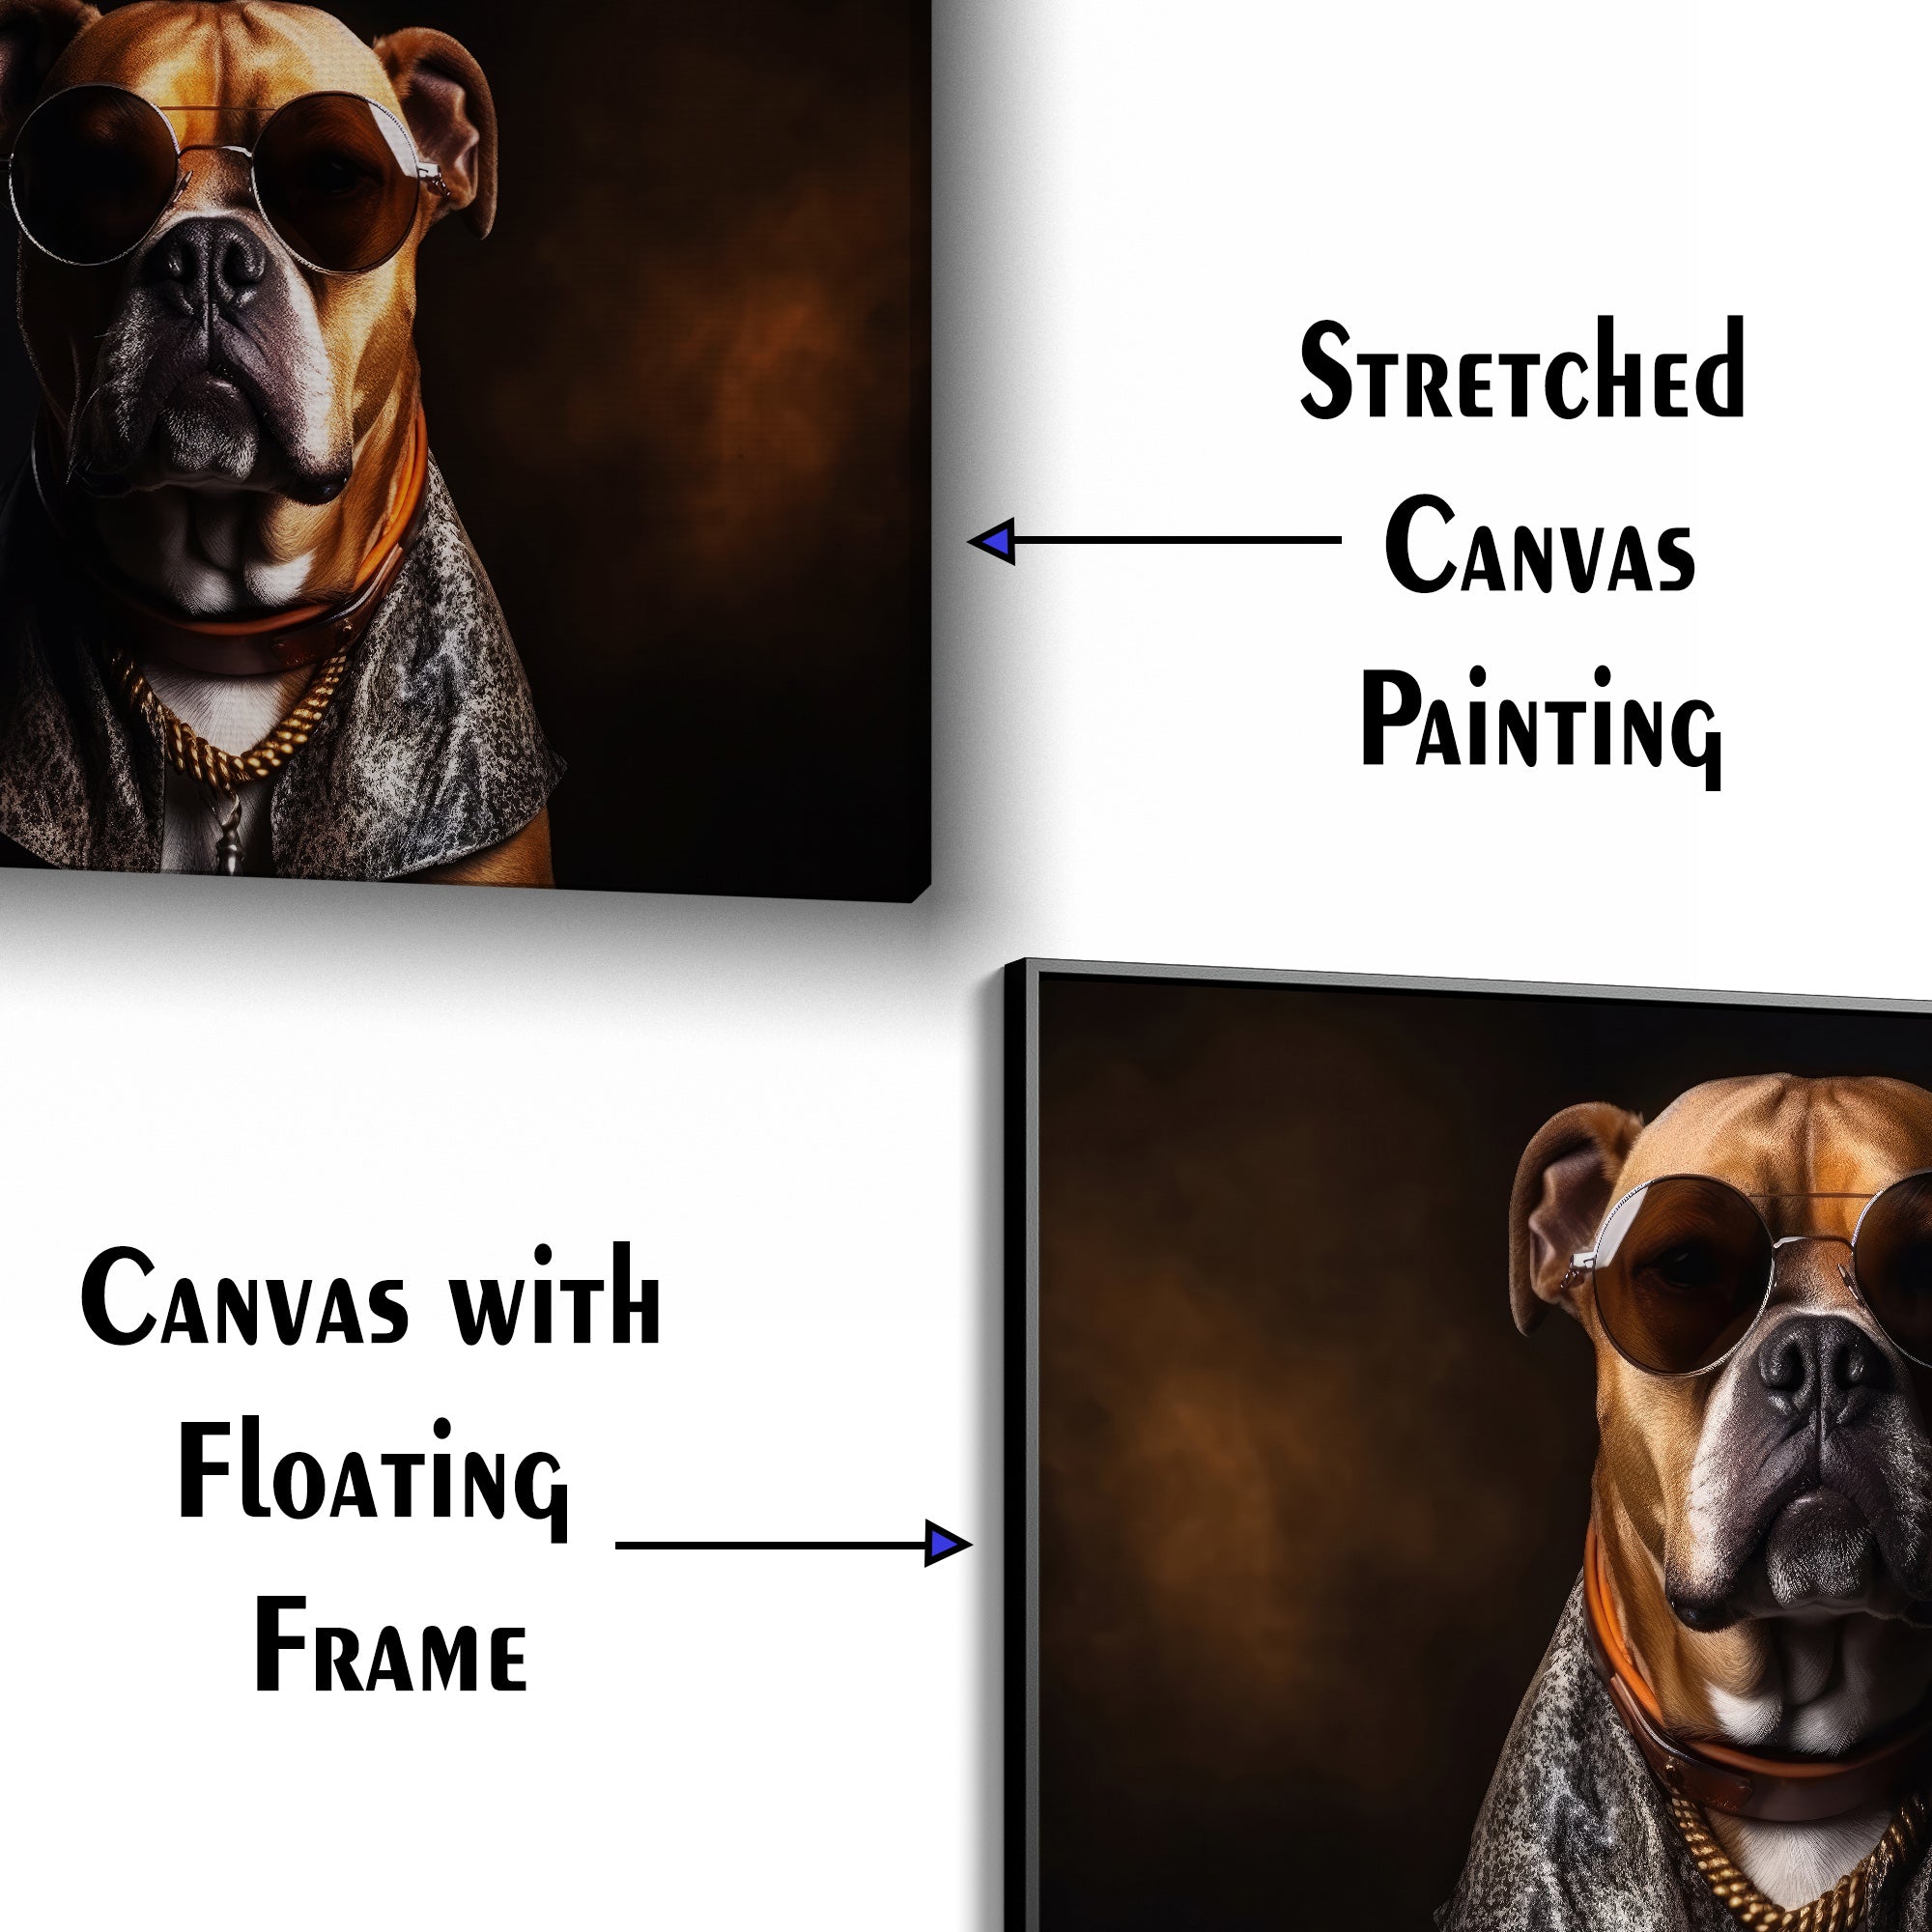 Gangster Boxer dog Canvas Wall Painting